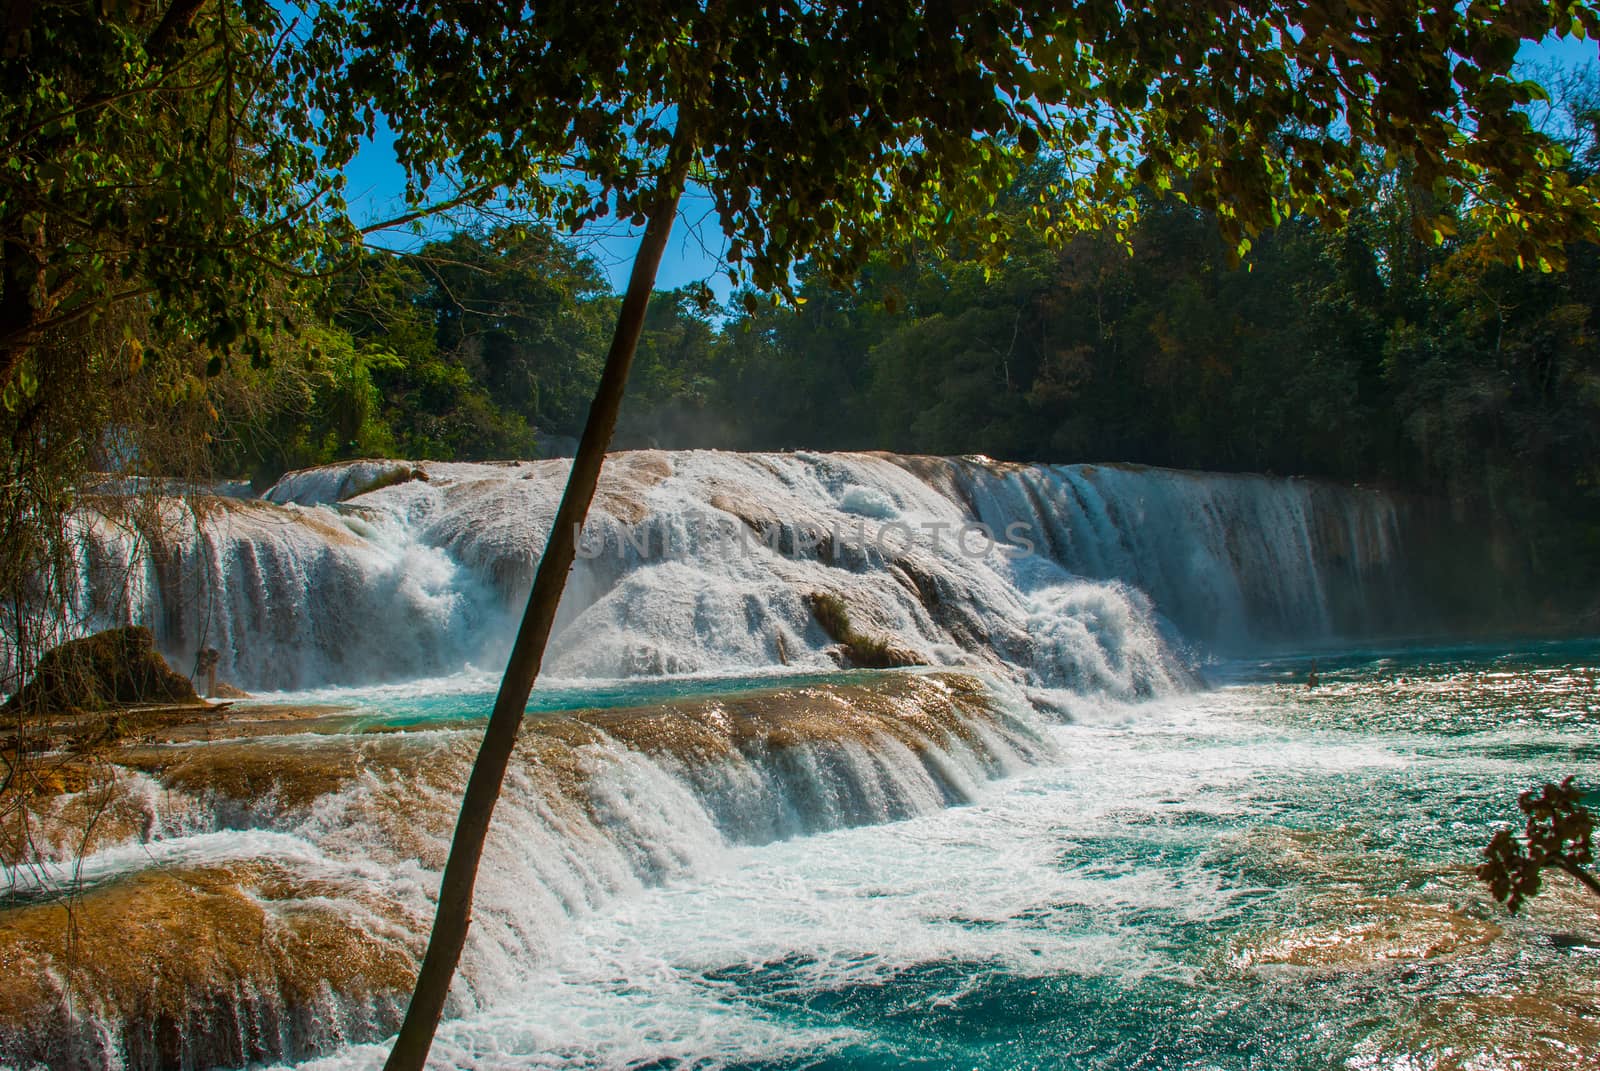 Magnificent waterfall in Mexico, beautiful scenery overlooking the waterfall Agua Azul near Palenque, state Chiapas.